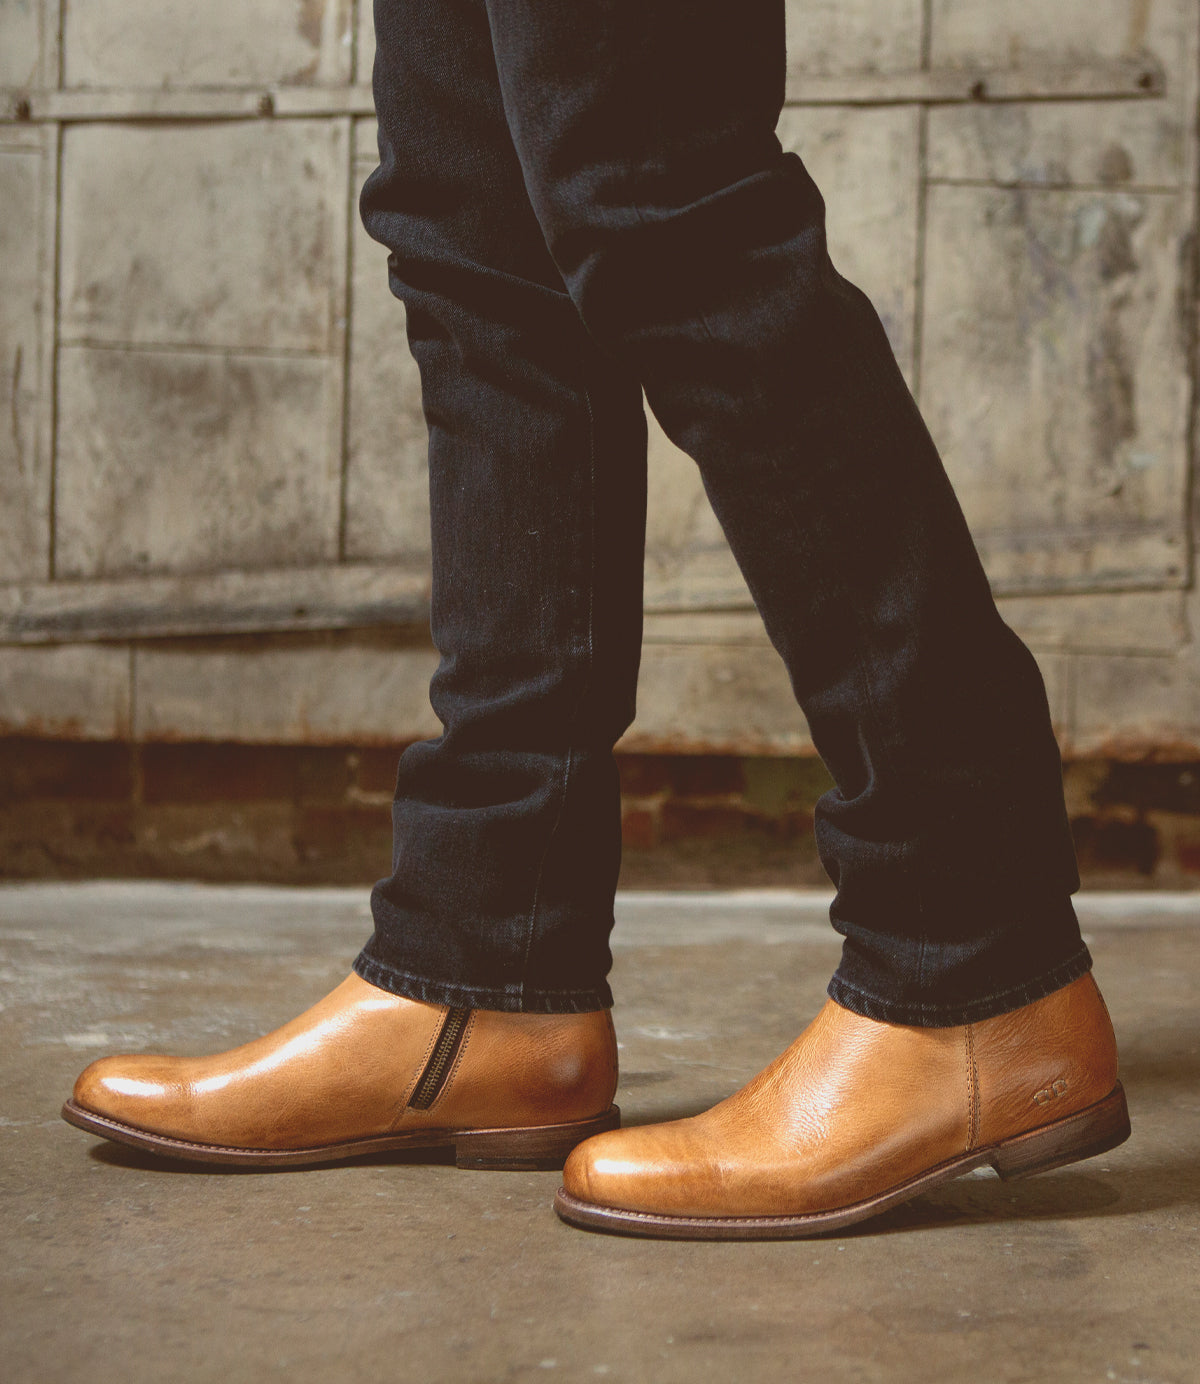 A person wearing Bed Stu Kaldi ankle boots and dark jeans standing against a brick wall.